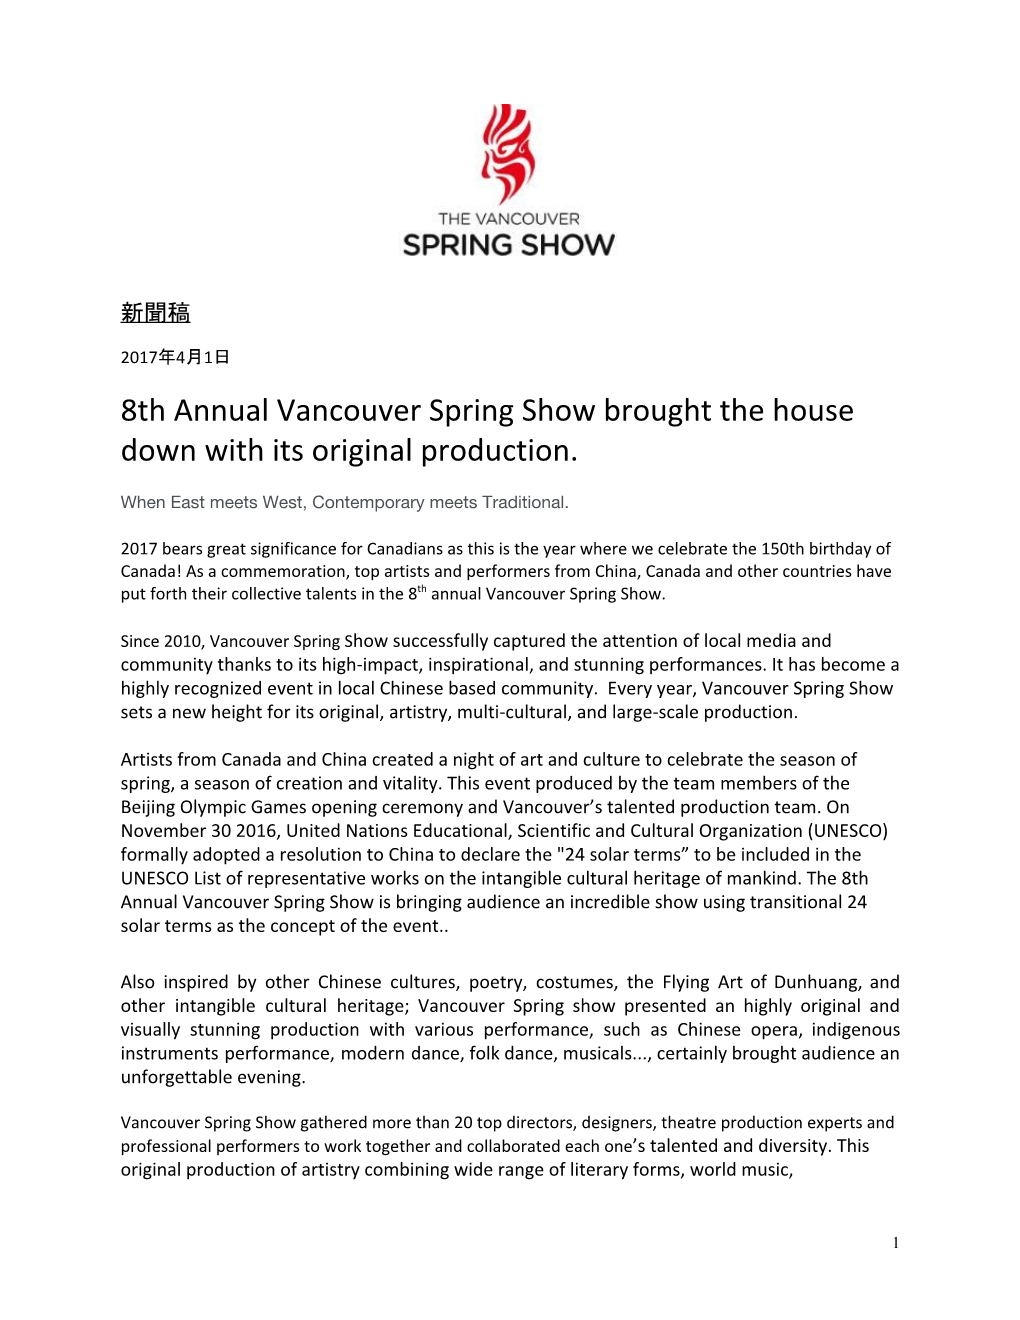 8Th Annual Vancouver Spring Show Brought the House Down with Its Original Production